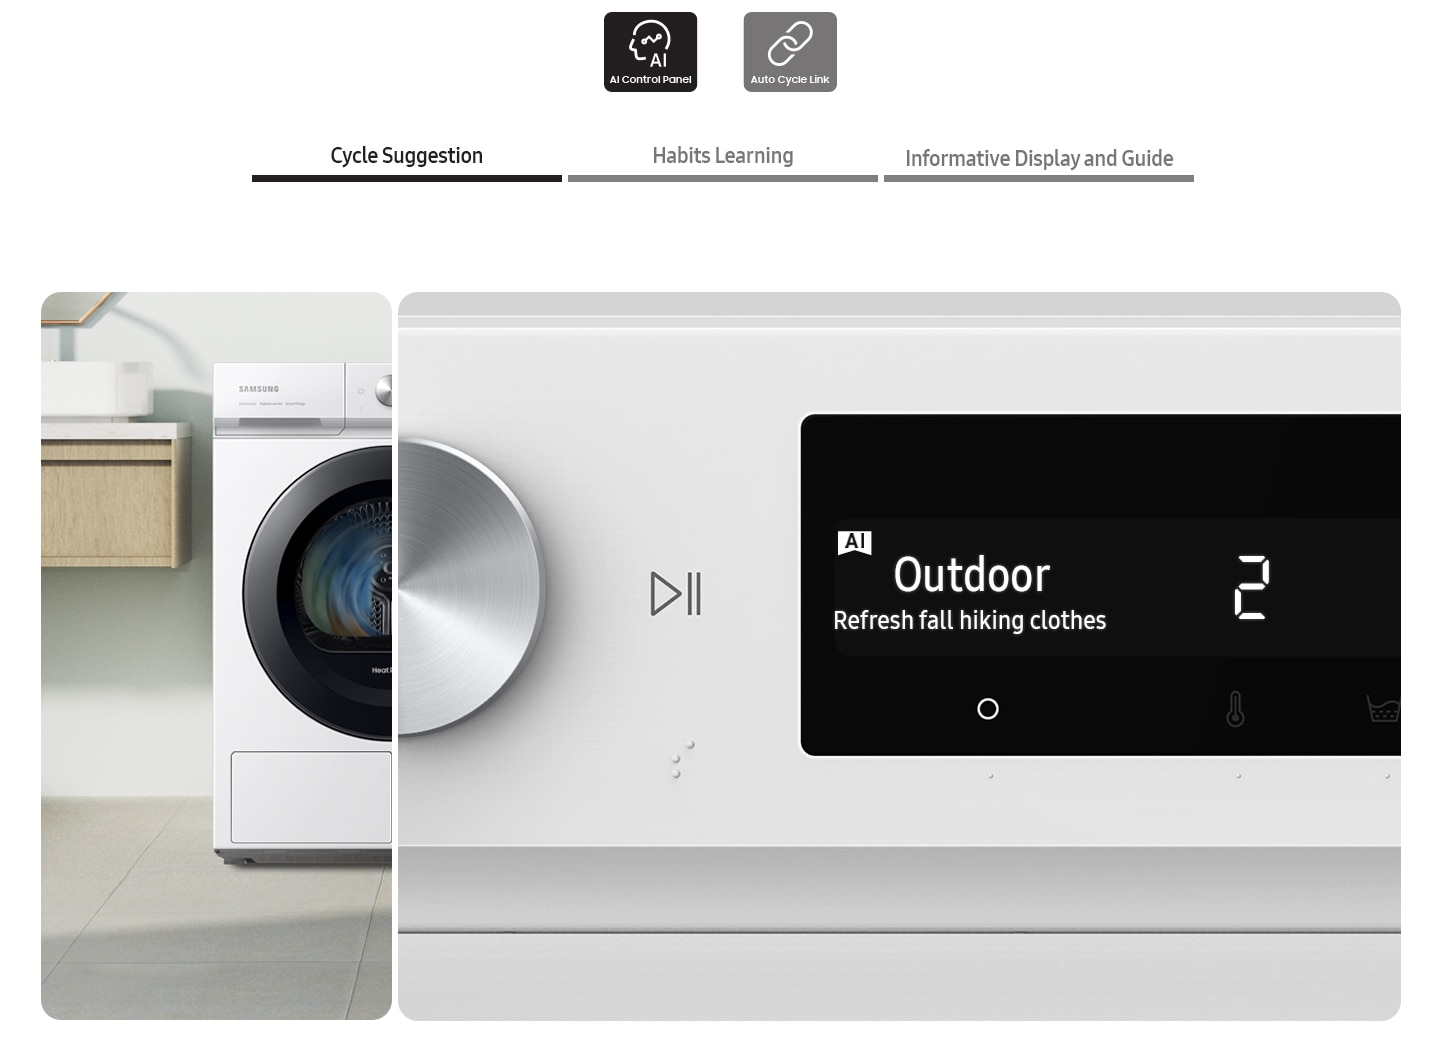 The AI dryer’s control panel displays the Cycle suggestion, Habits learning, Informative display and guide.